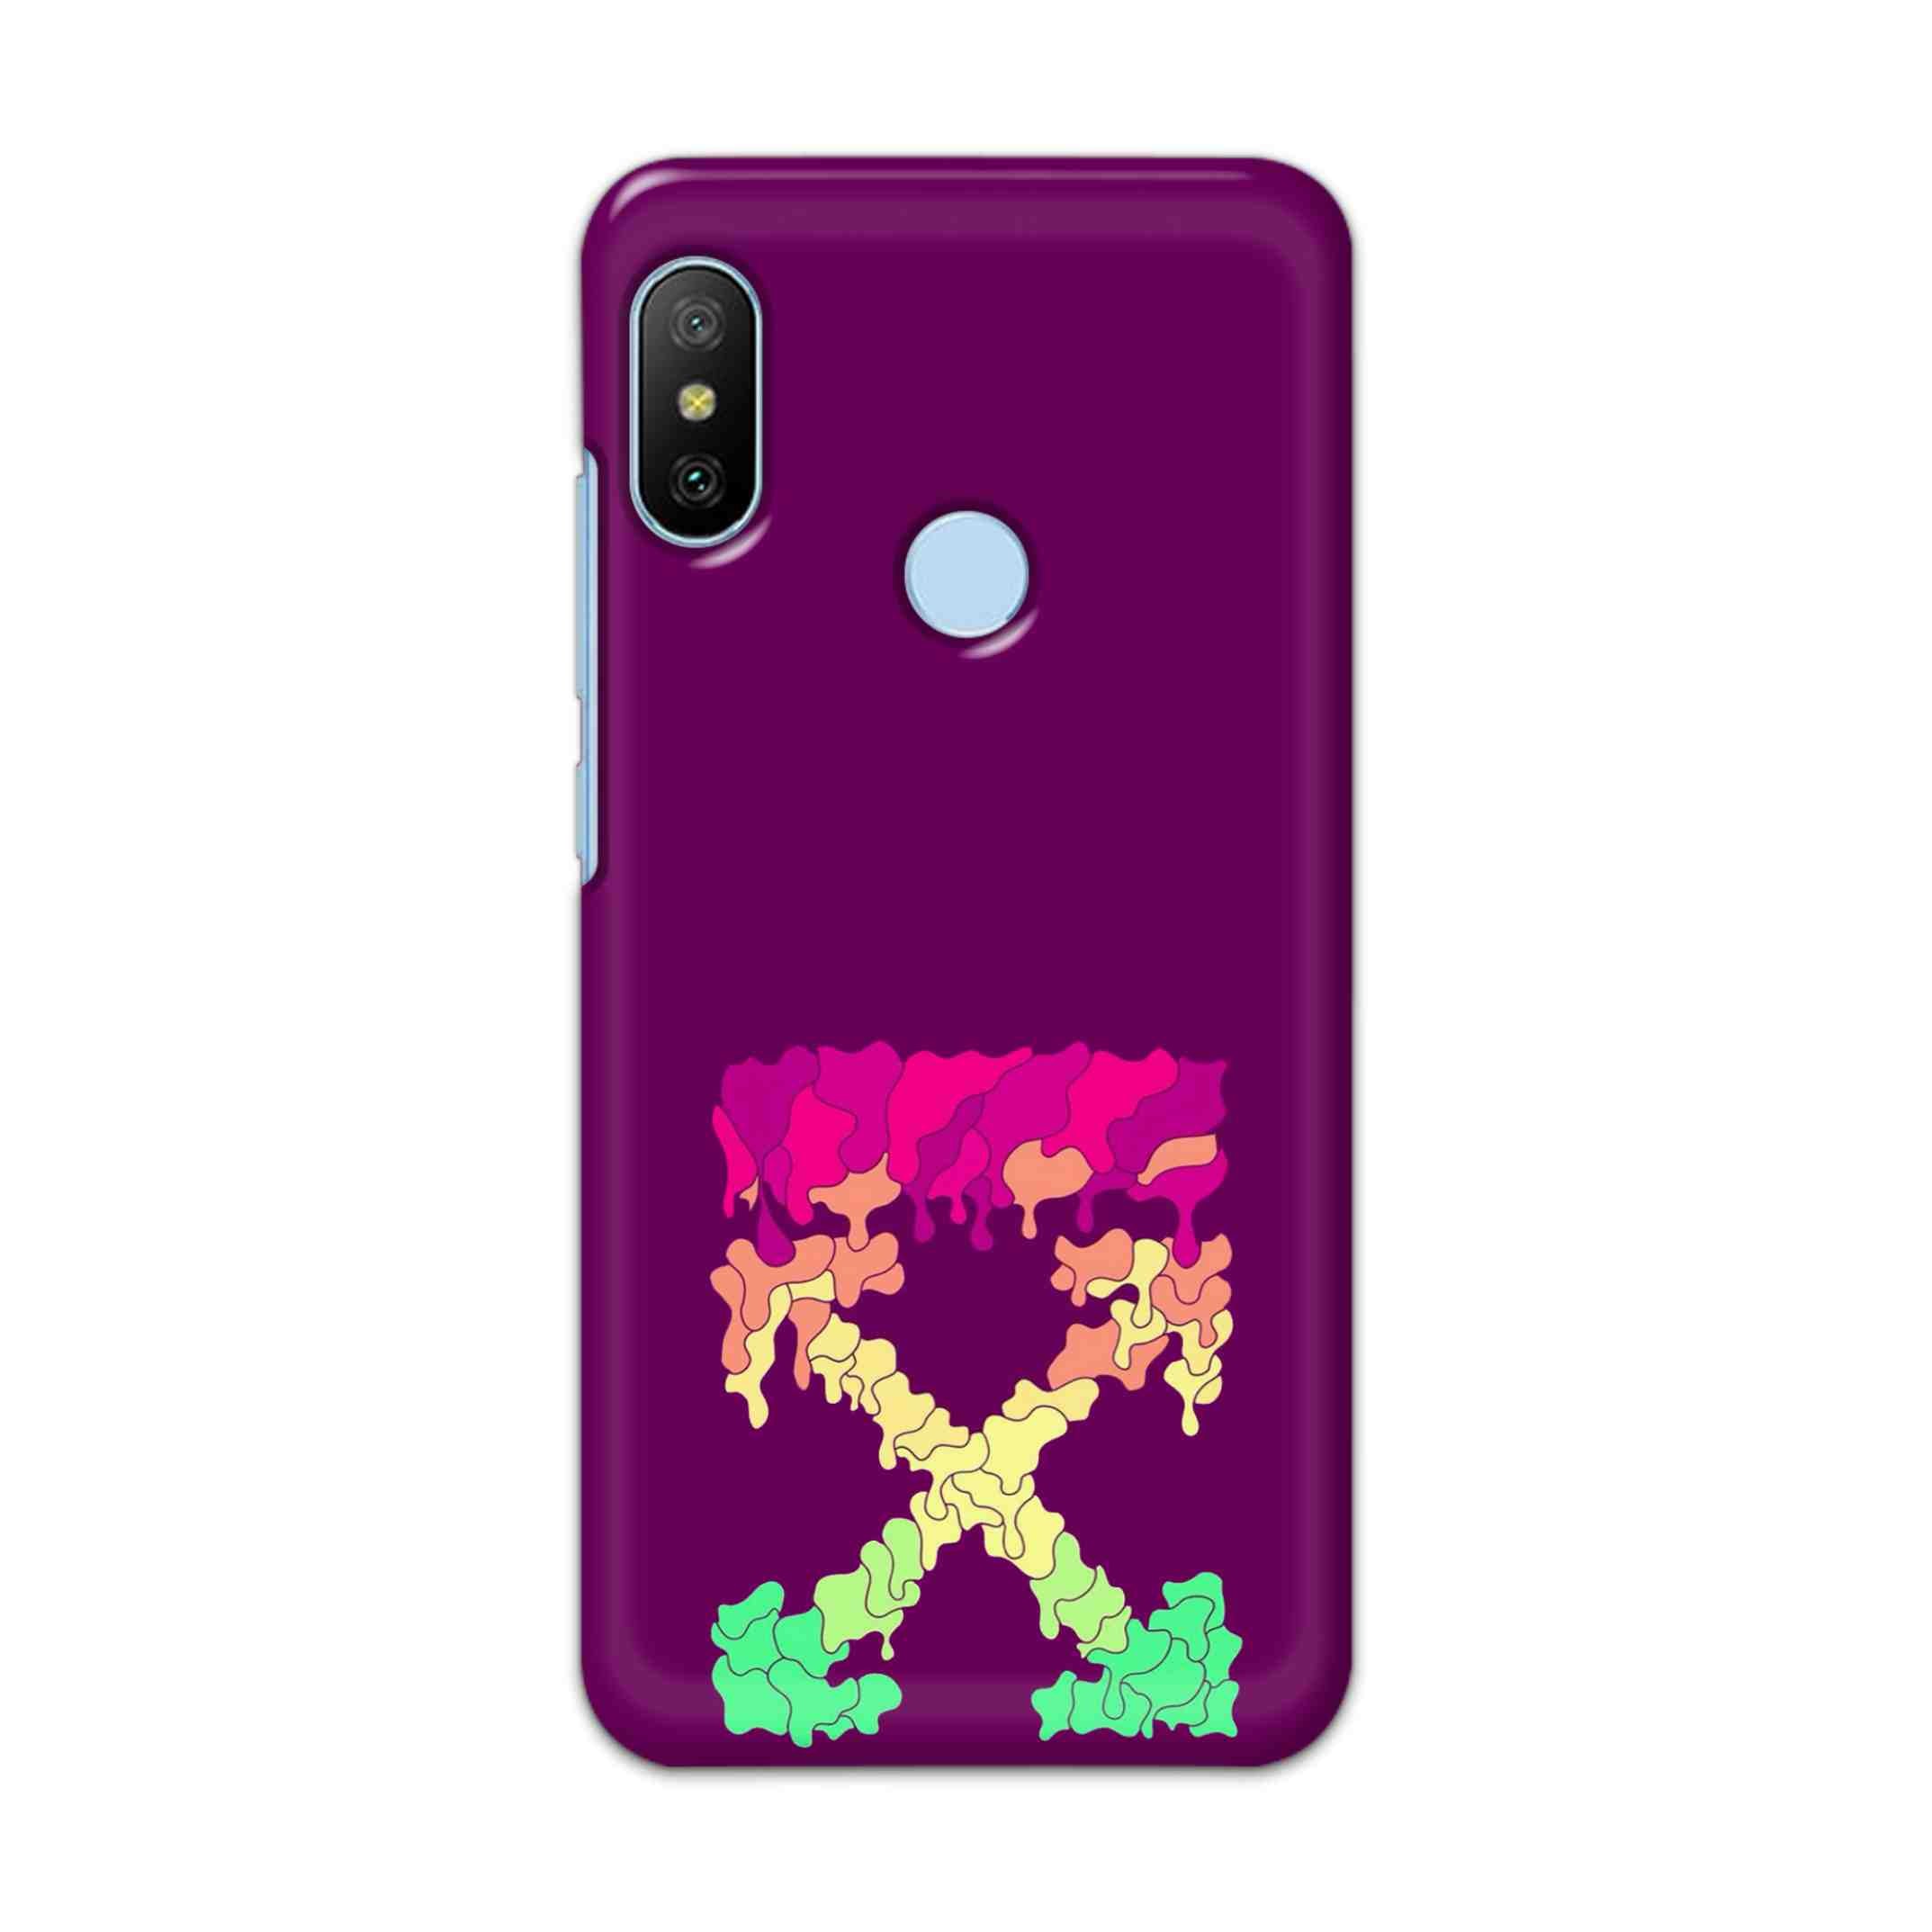 Buy X.O Hard Back Mobile Phone Case/Cover For Xiaomi Redmi 6 Pro Online